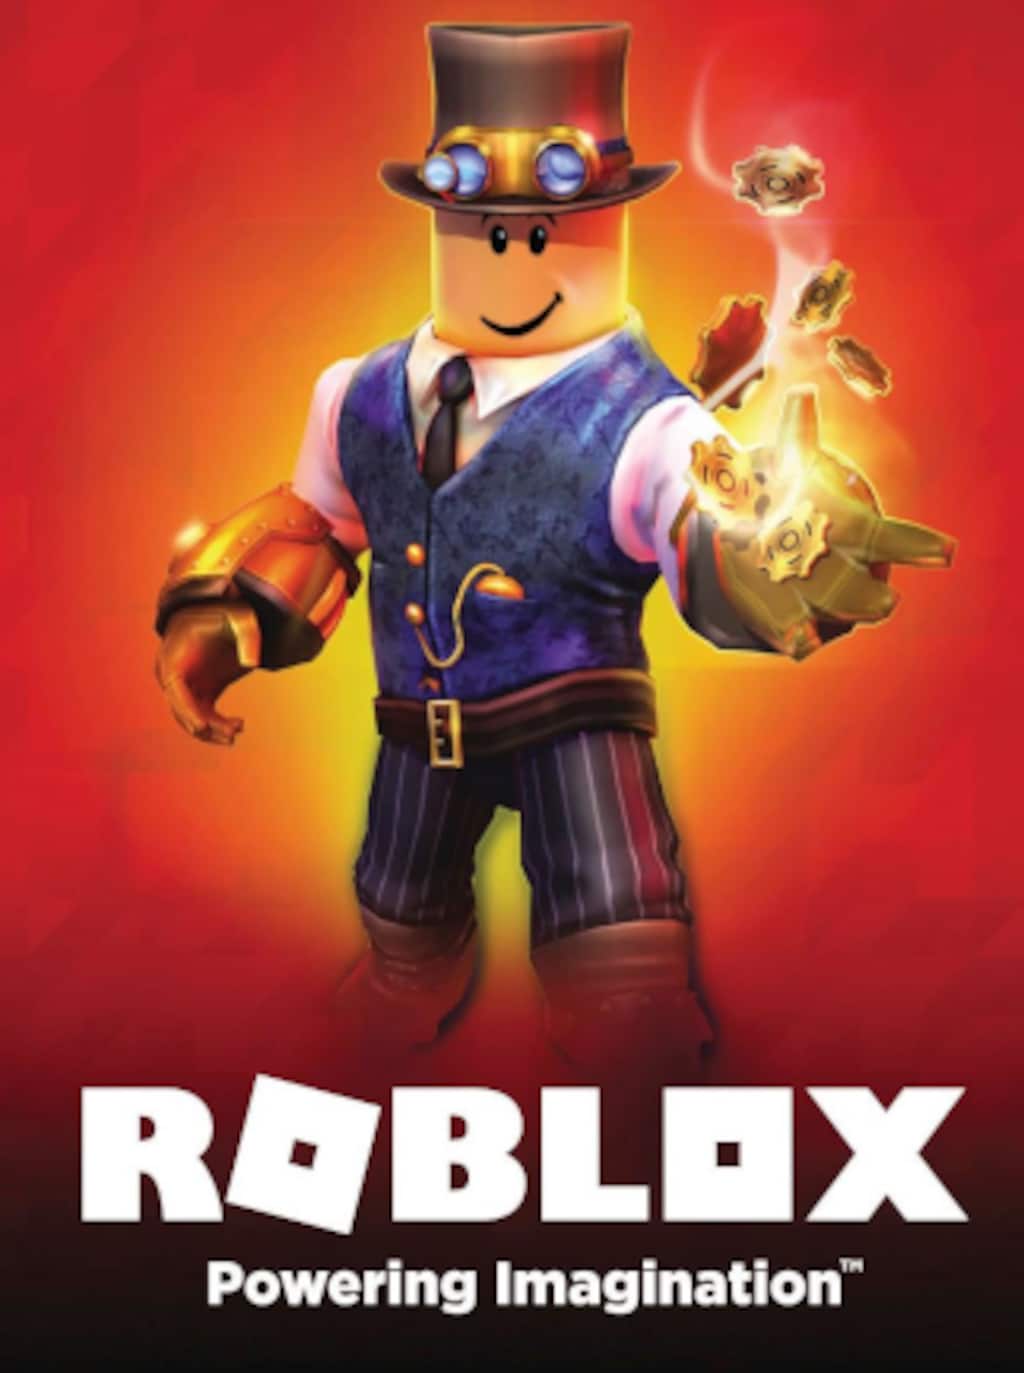 will i still get plasma wings if i redeem a 100 robux giftcard : r